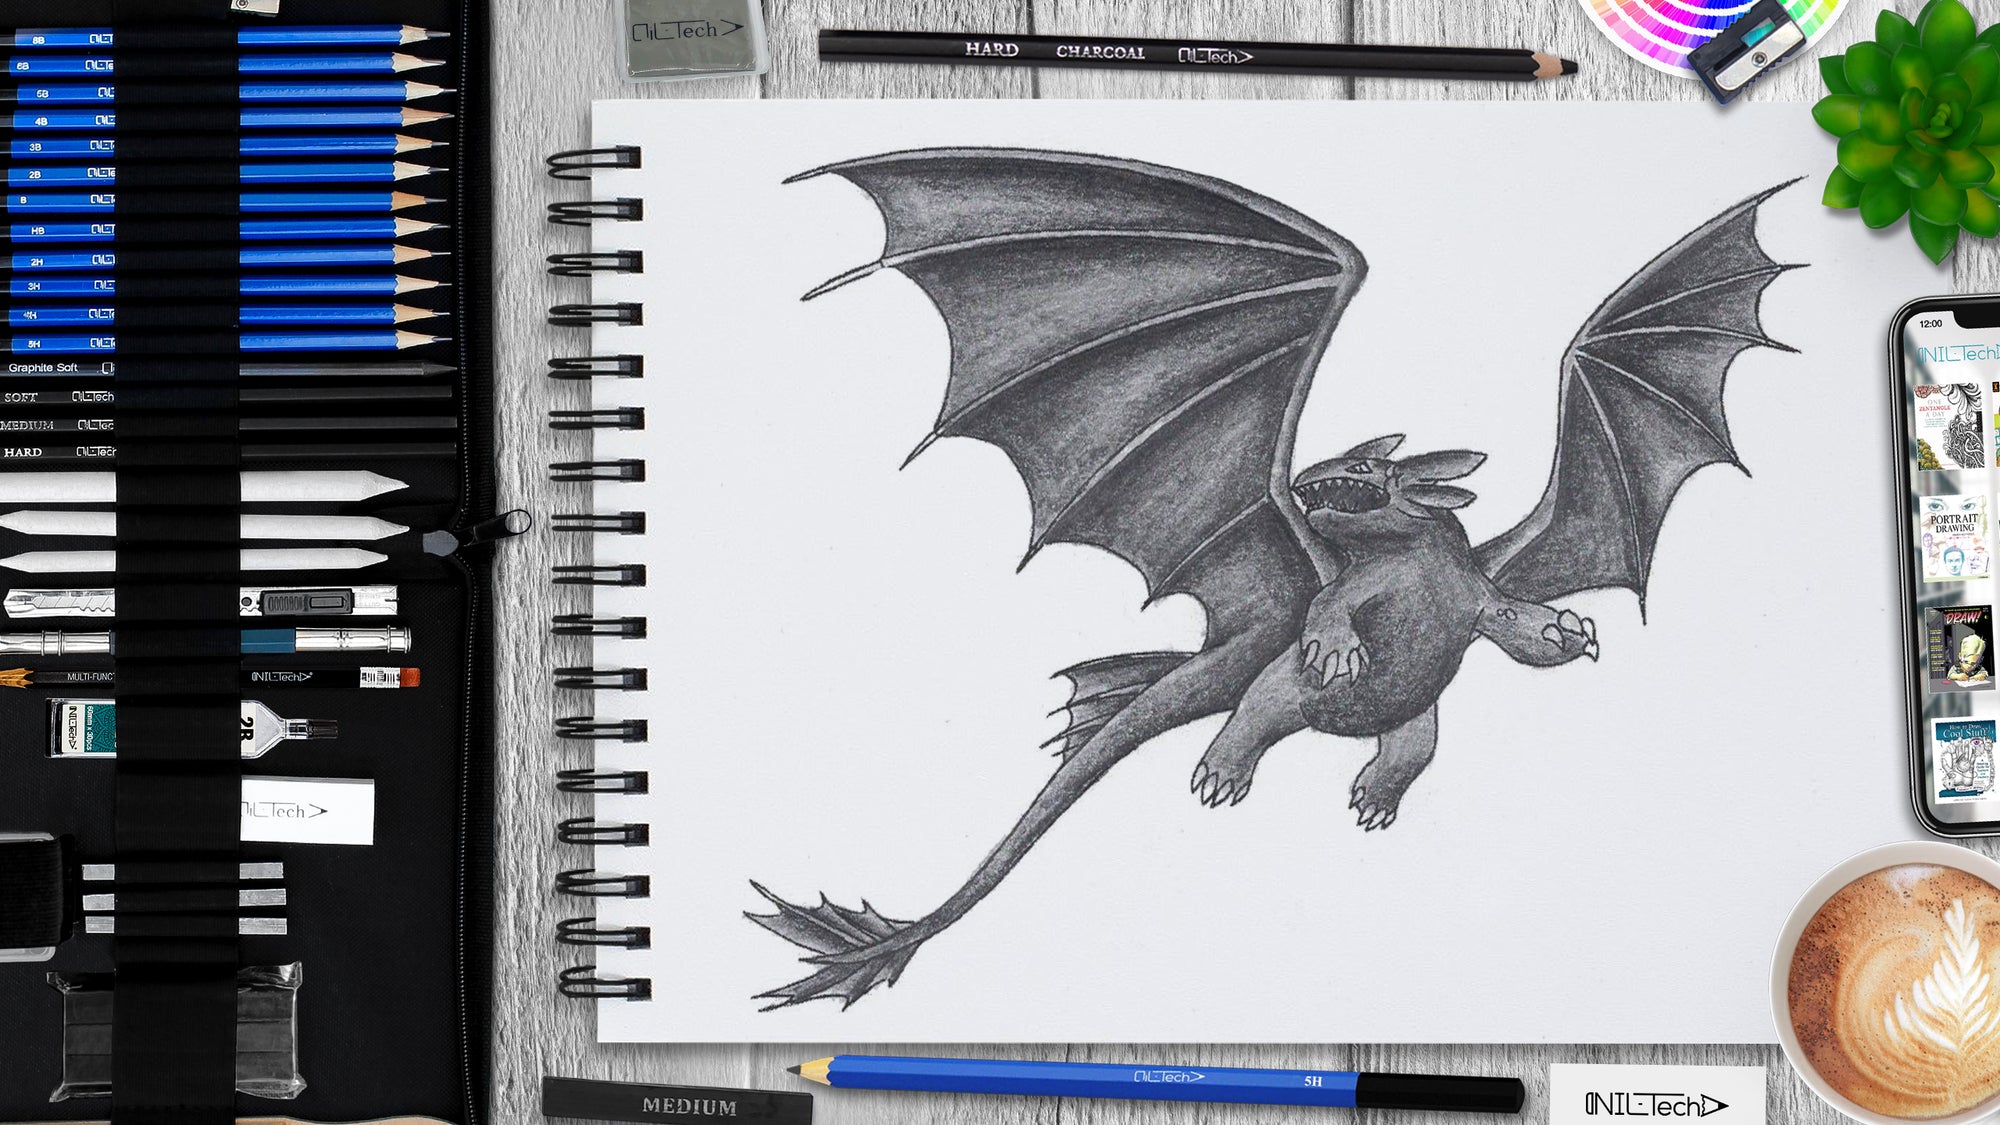 Christopher Straver - LethalChris Drawing - Hi everyone! Here's my drawing  of Toothless from How To Train Your Dragon! I also uploaded the time lapse  video on my YouTube channel - so